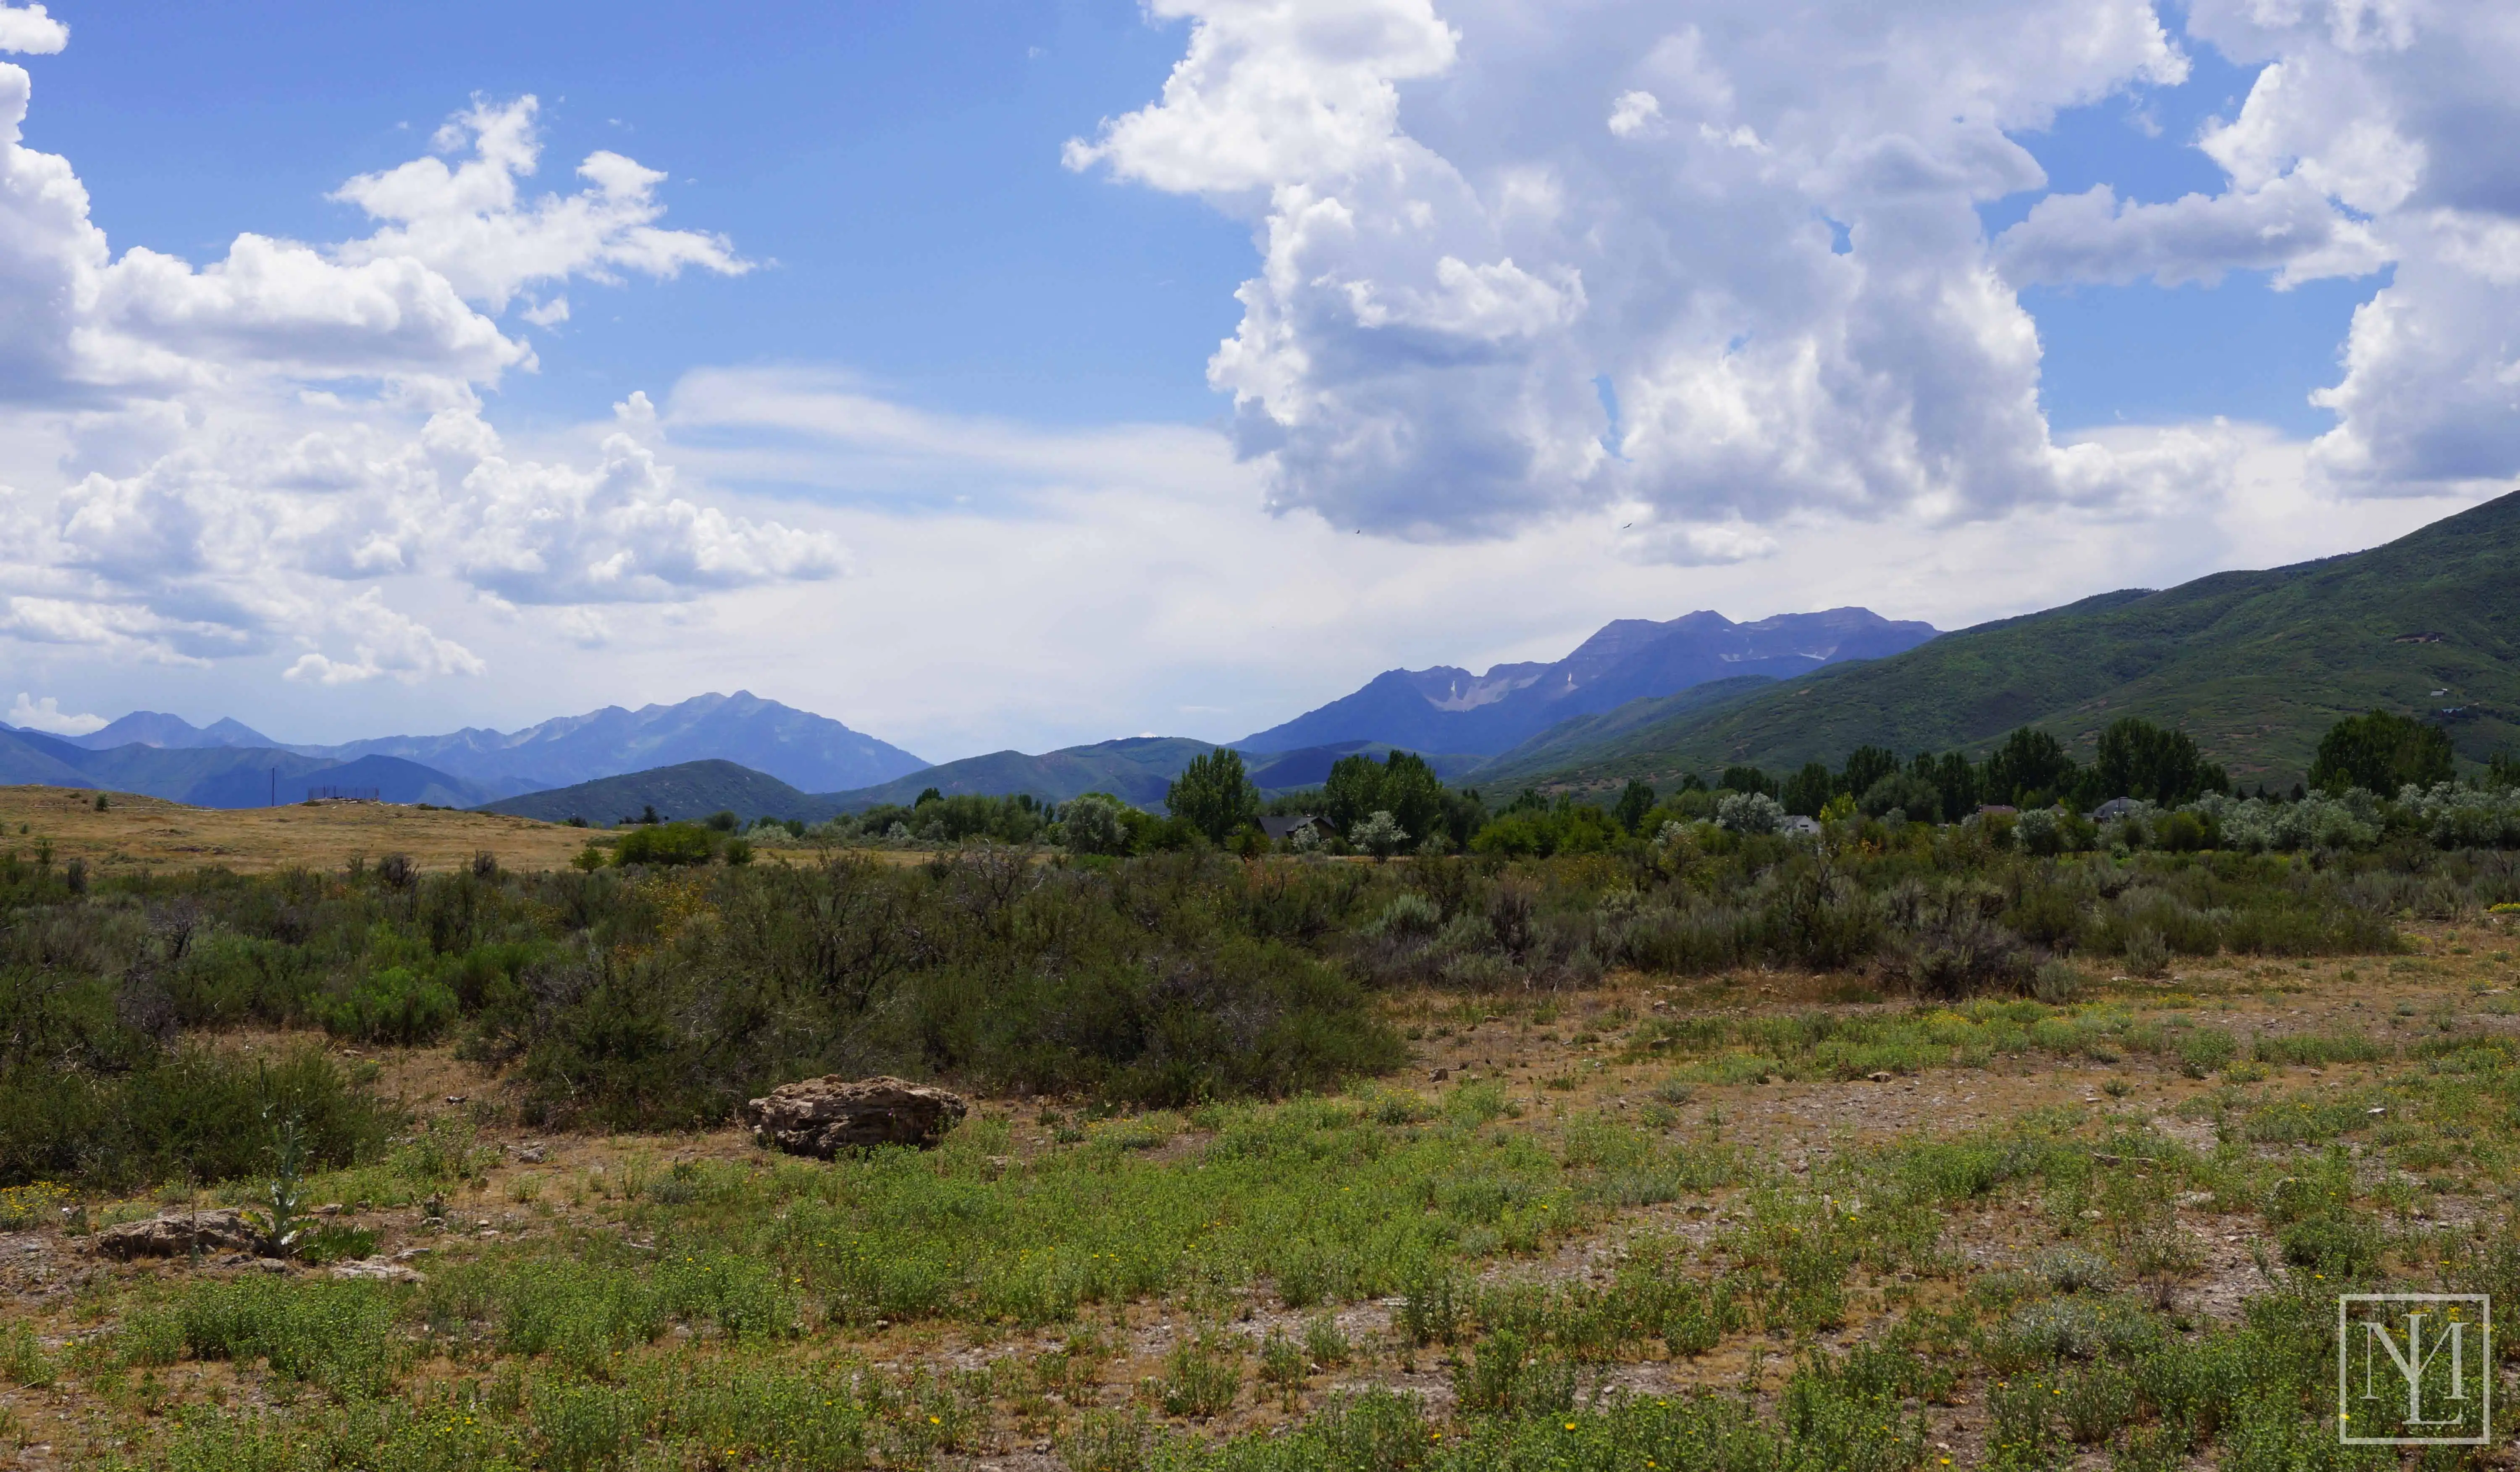 hero image for blog 1100 N 100 W Midway, UT - Over 50 acres land in serene Midway - SOLD!